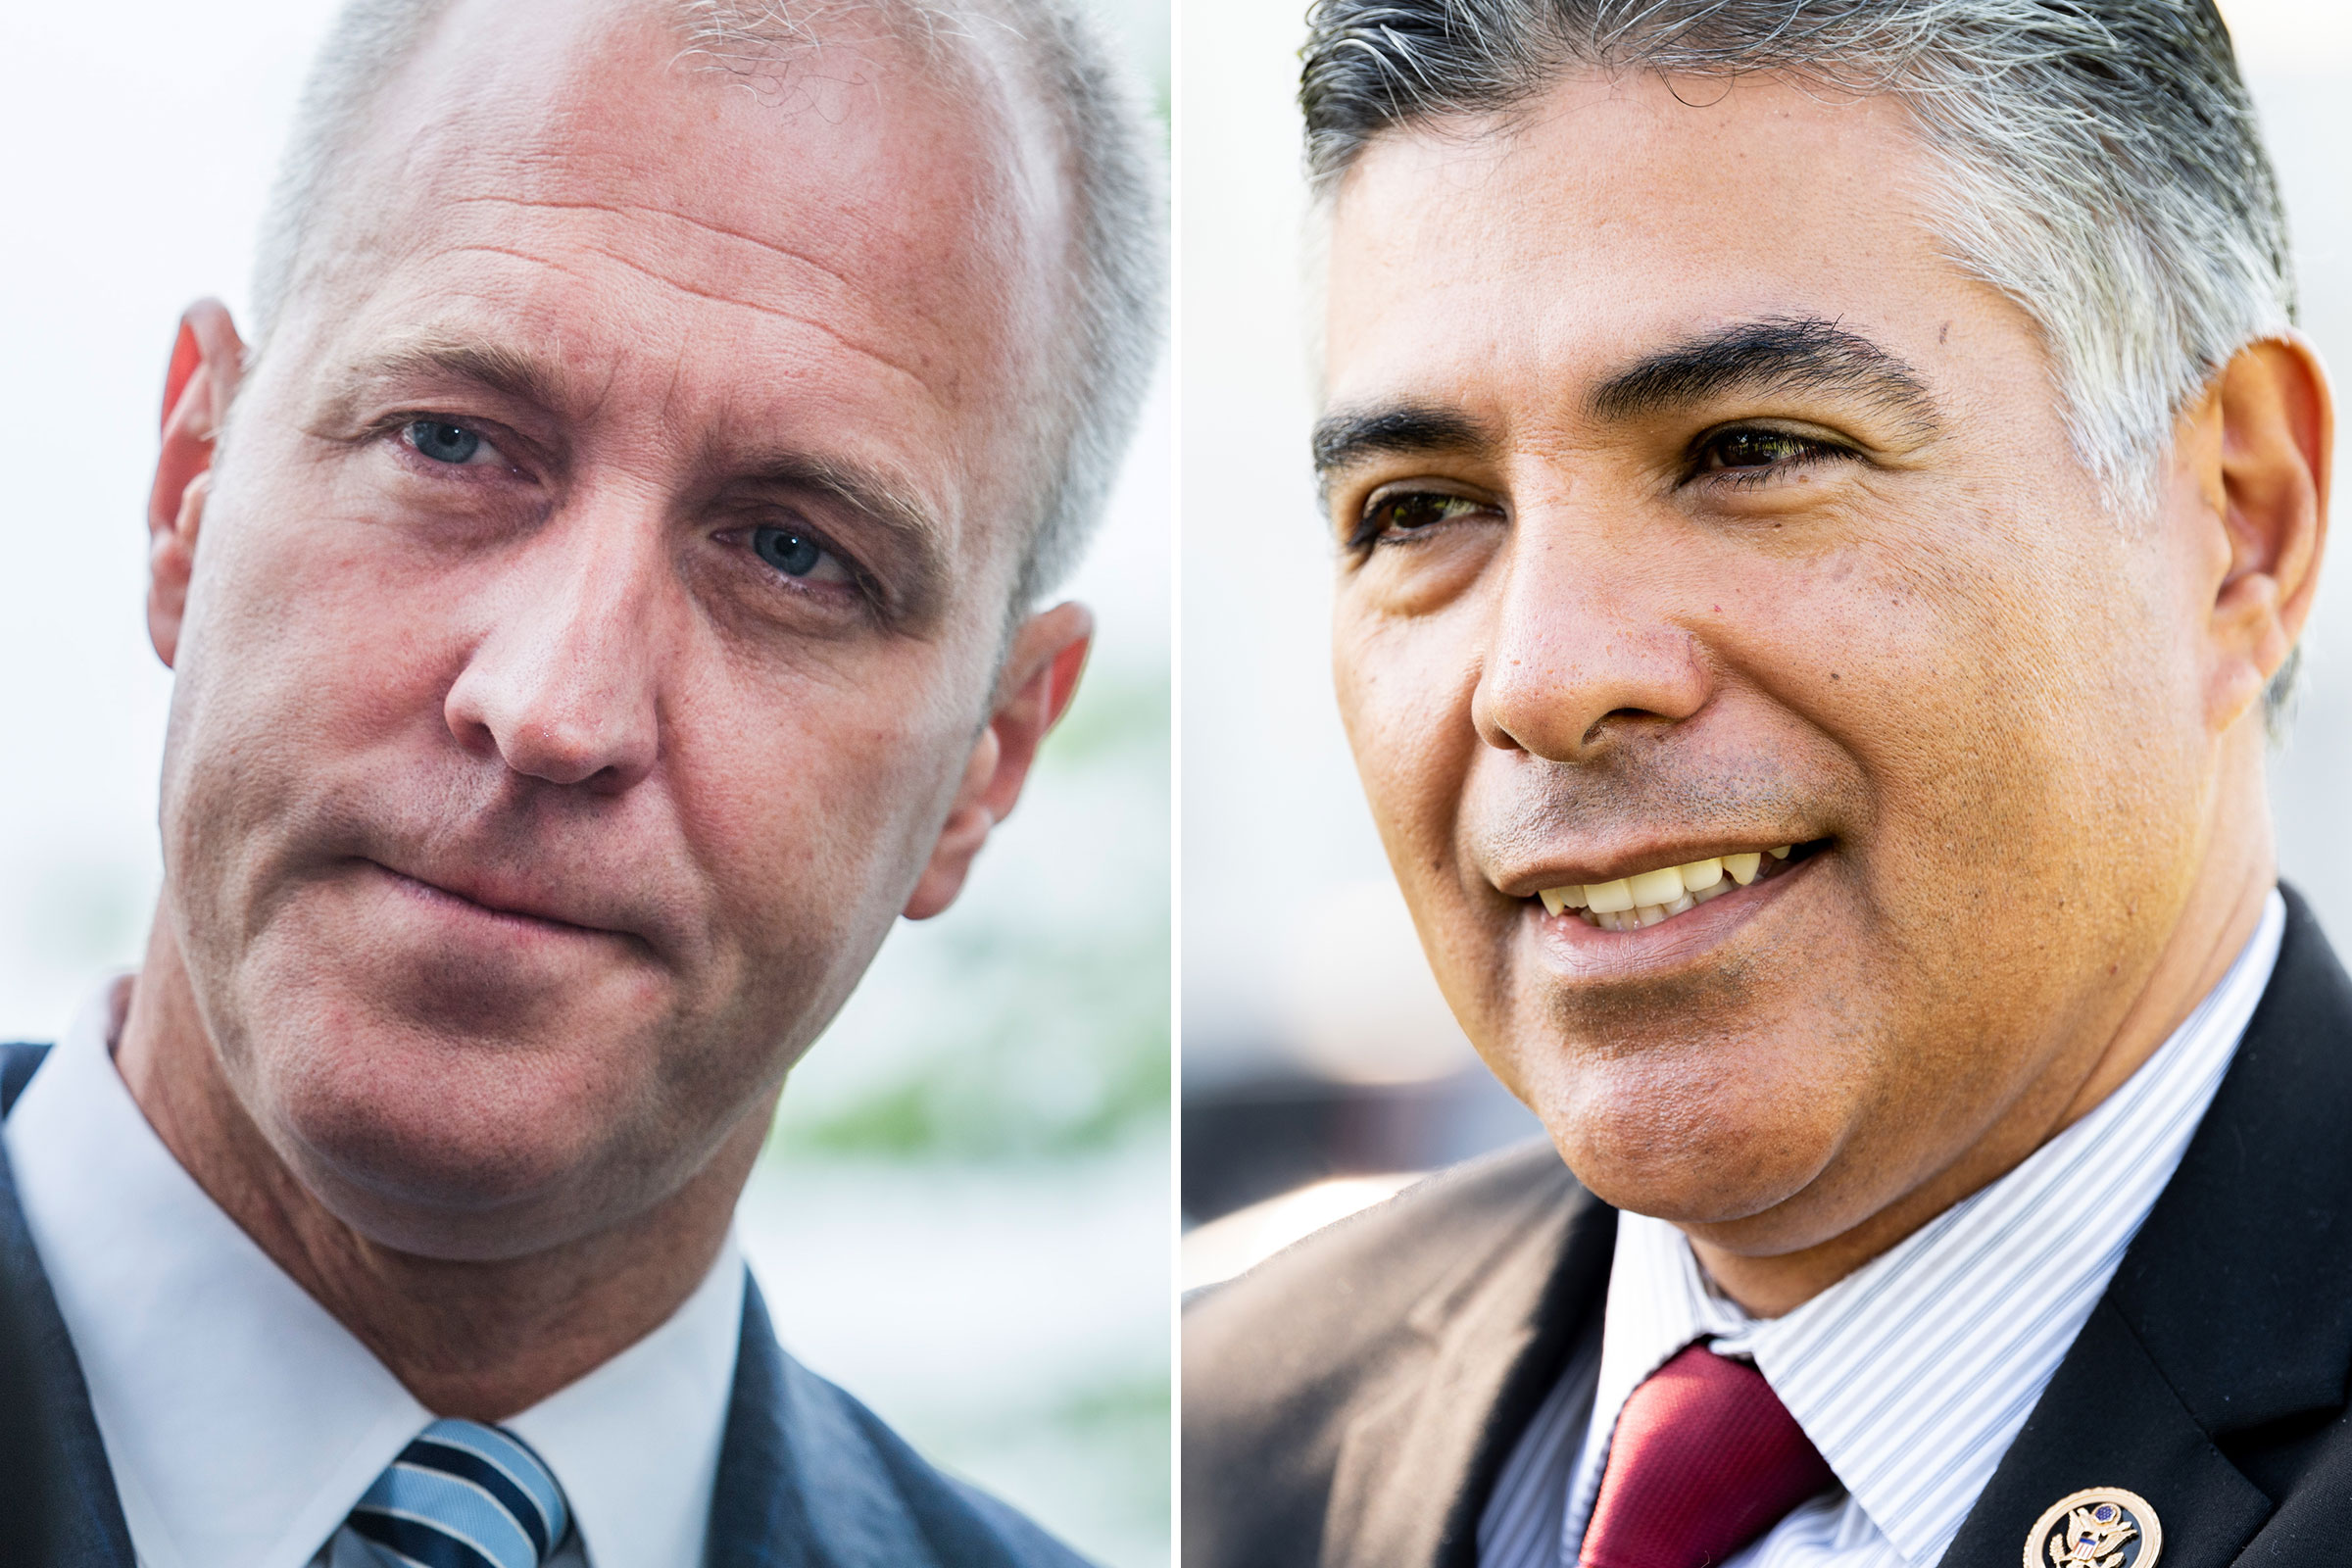 Rep. Sean Patrick Maloney outside the Capitol in Washington on June 13, 2019; Rep. Tony Cardenas outside the Capitol on July 15, 2019 (Tom Williams—CQ Roll Call/Getty Images; Michael Brochstein—SOPA Images/LightRocket/Getty Images)